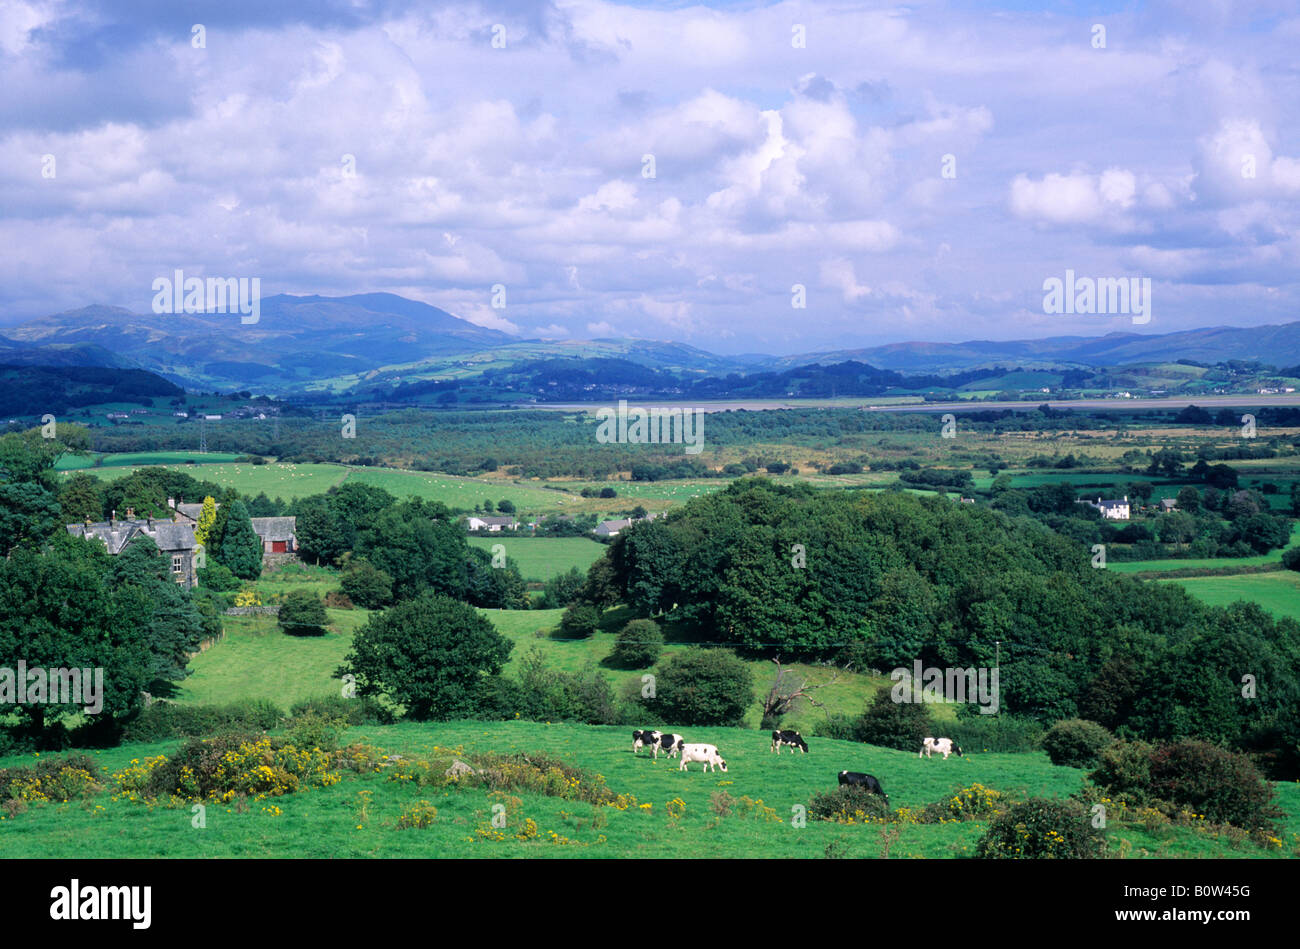 Cumbria Cumbrian Landscape view to Duddon Sands English scenery travel England UK green fields mountains Stock Photo